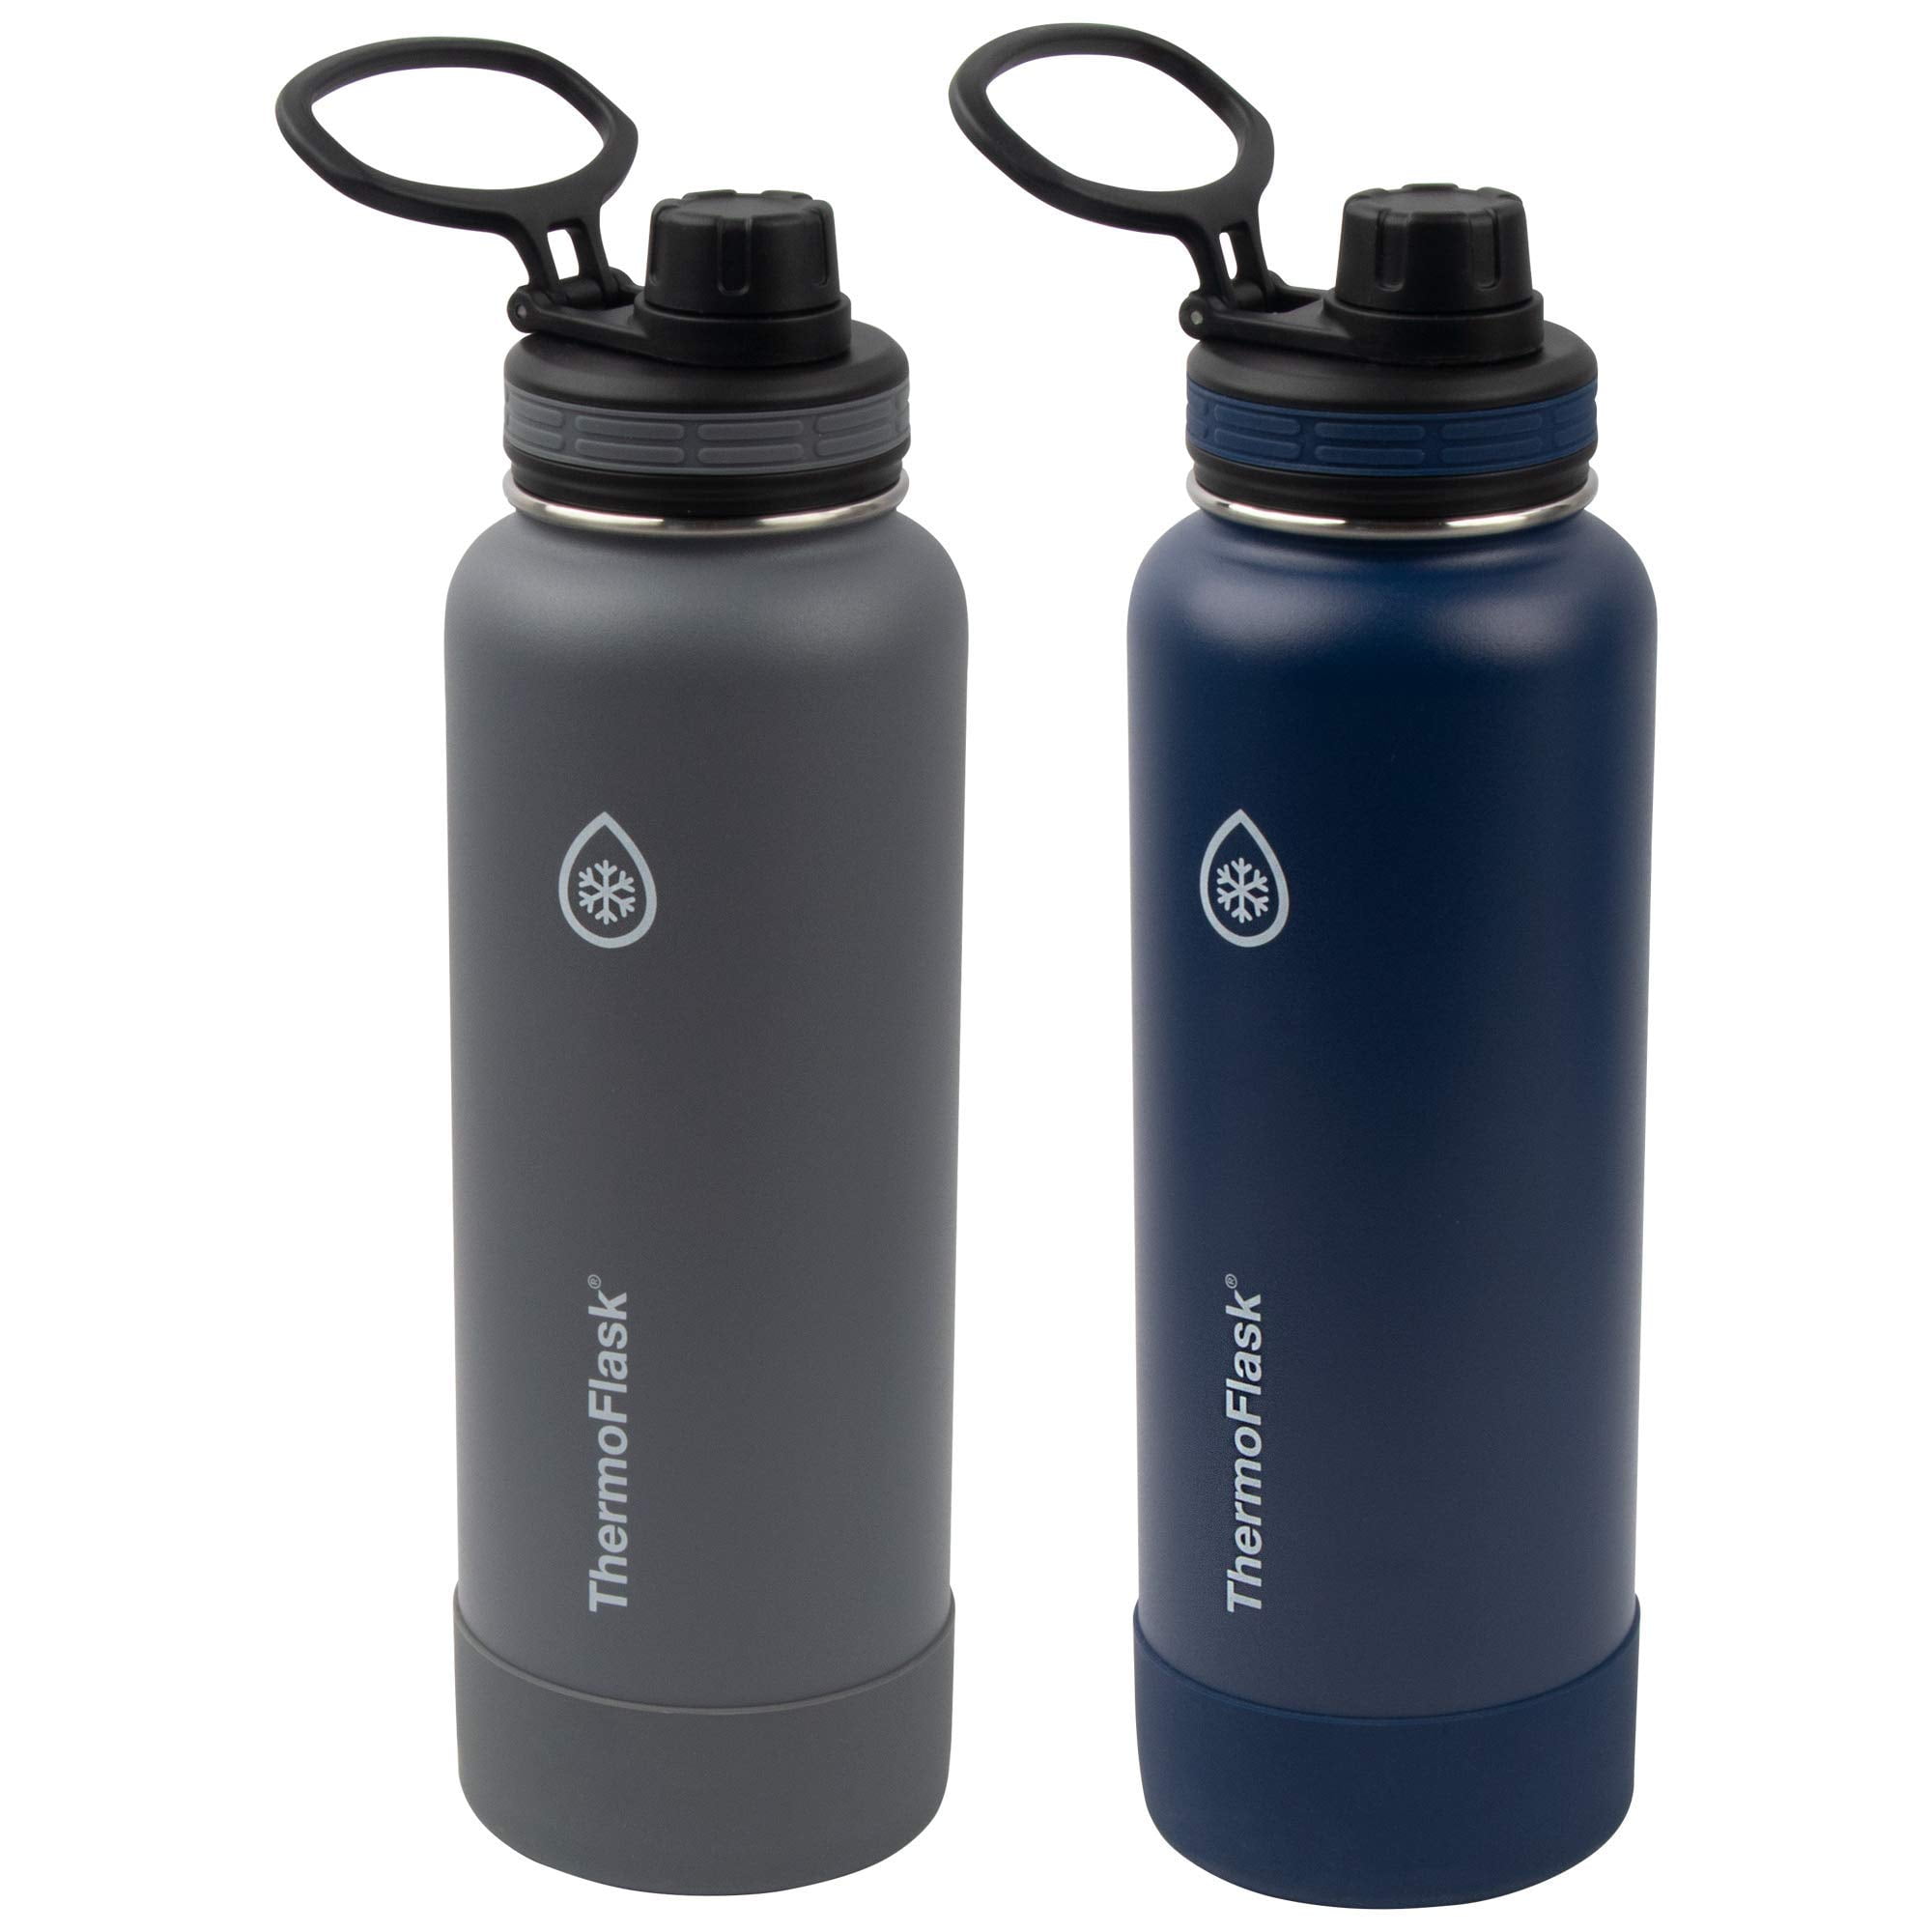 Thermoflask Double Wall Vacuum Insulated Stainless Steel Water Bottle  2-Pack, Midnight/Stone 